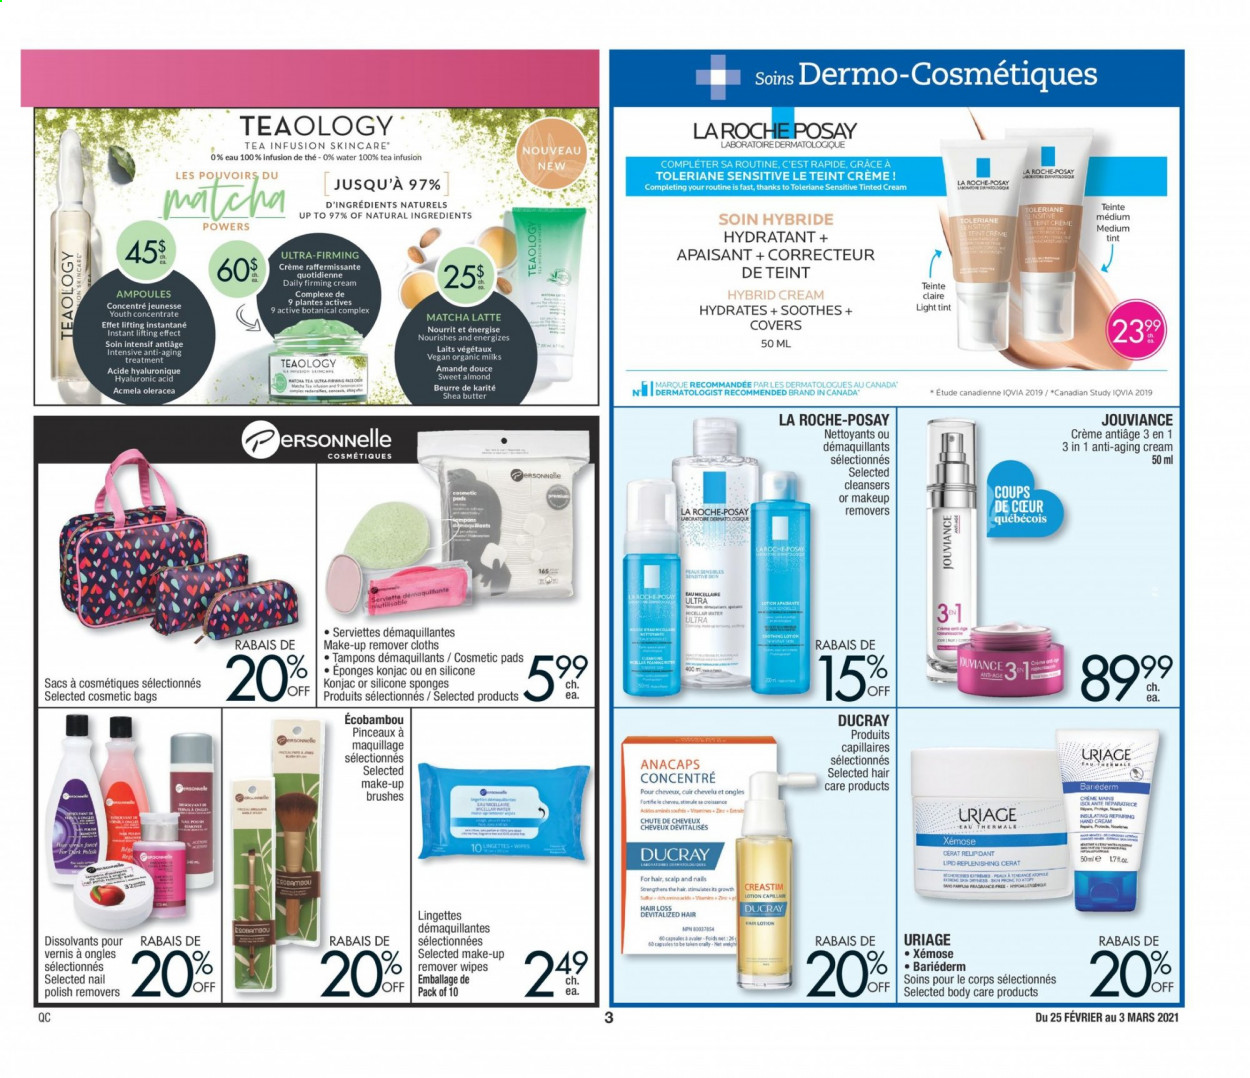 thumbnail - Jean Coutu Flyer - February 25, 2021 - March 03, 2021 - Sales products - Mars, Ace, matcha, tea, wipes, tampons, La Roche-Posay, micellar water, body lotion, shea butter, hand cream, cosmetic bag, polish, makeup, zinc. Page 3.